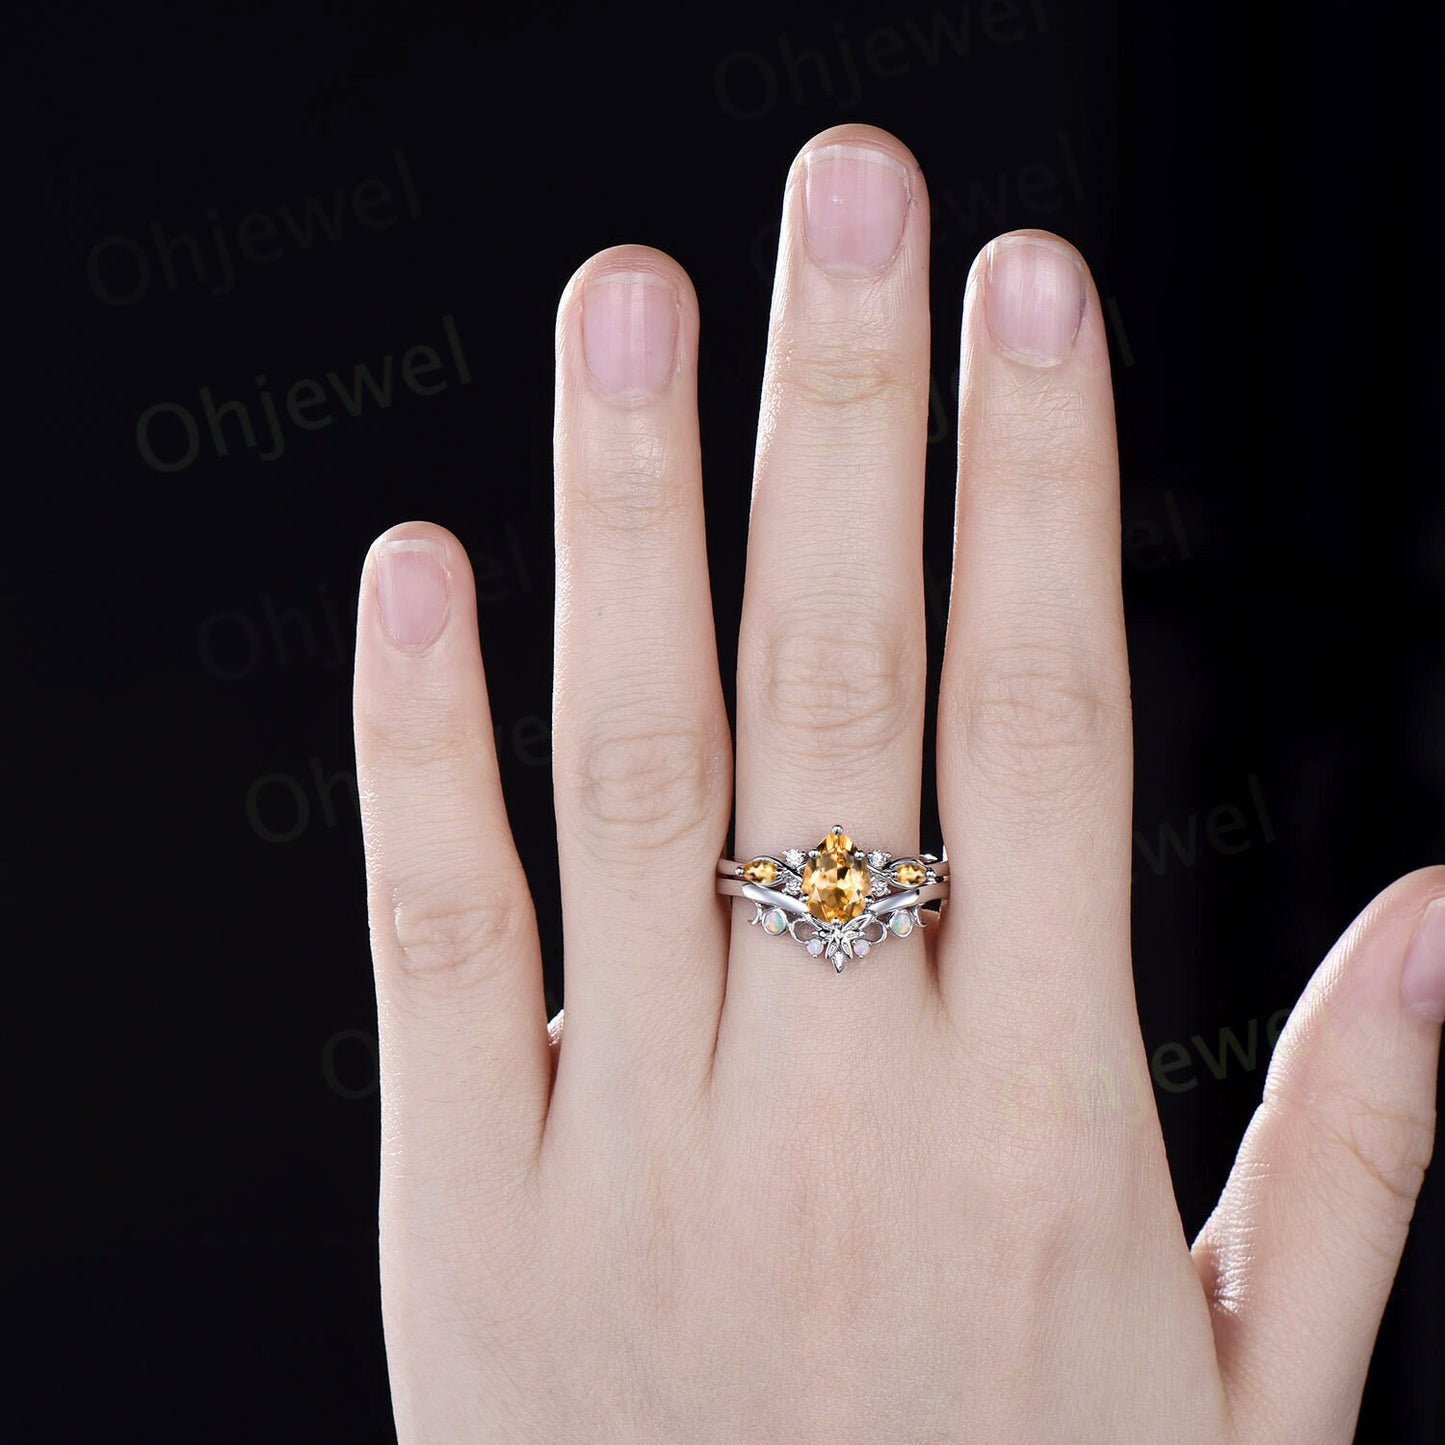 Pear shaped citrine ring vintage unique engagement ring art deco 14k yellow gold leaf opal ring women twisted wedding promise ring set gift